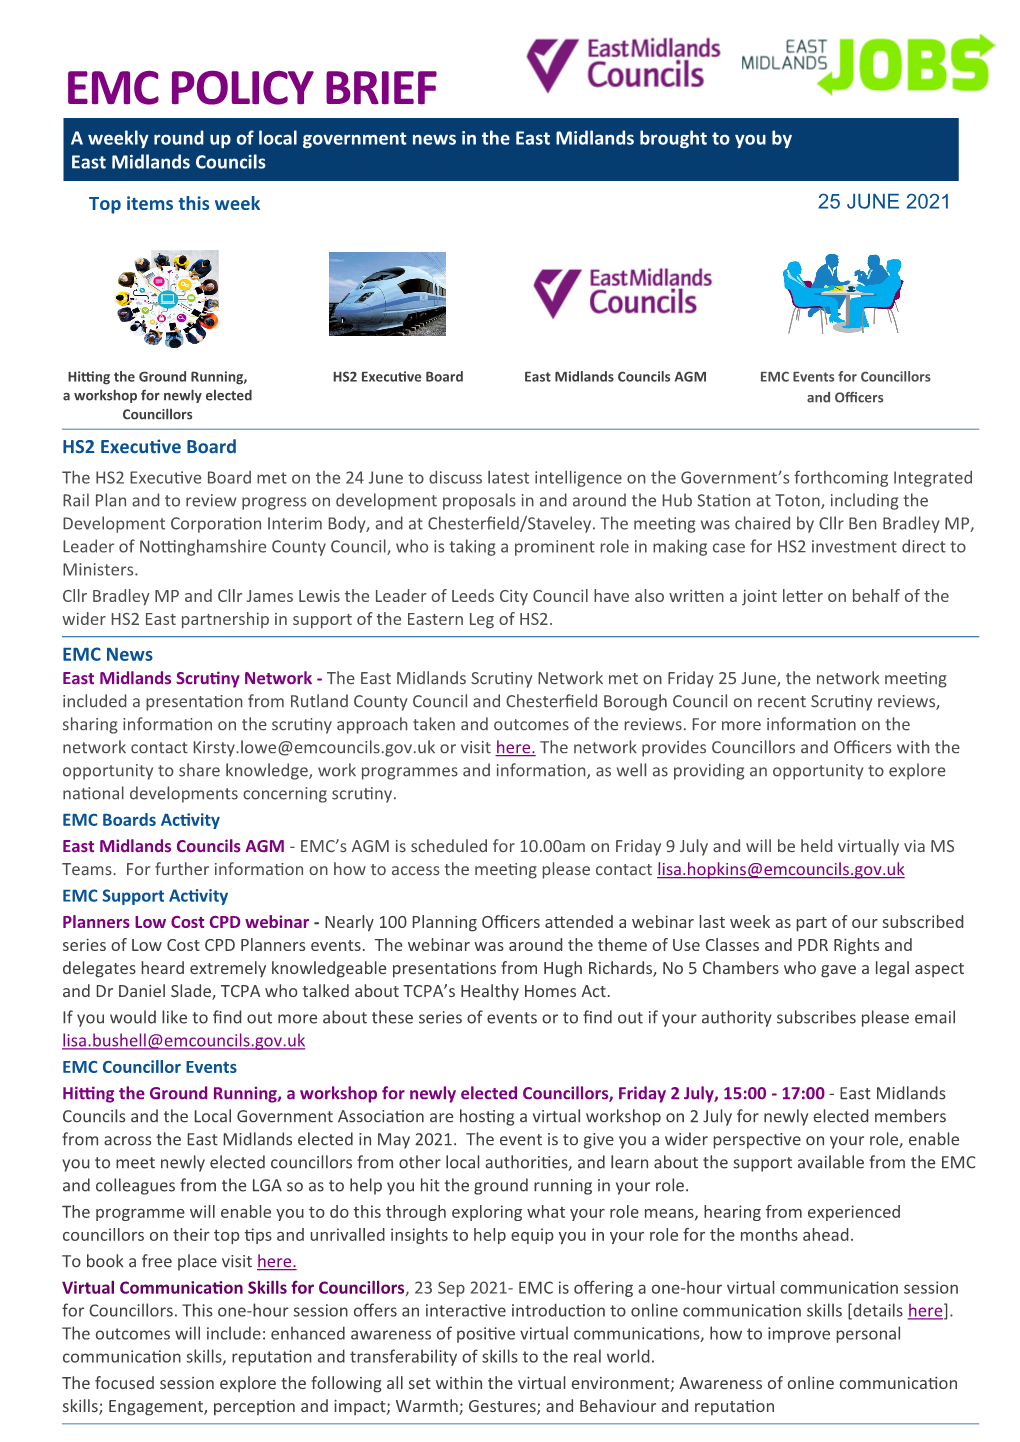 EMC POLICY BRIEF a Weekly Round up of Local Government News in the East Midlands Brought to You by East Midlands Councils